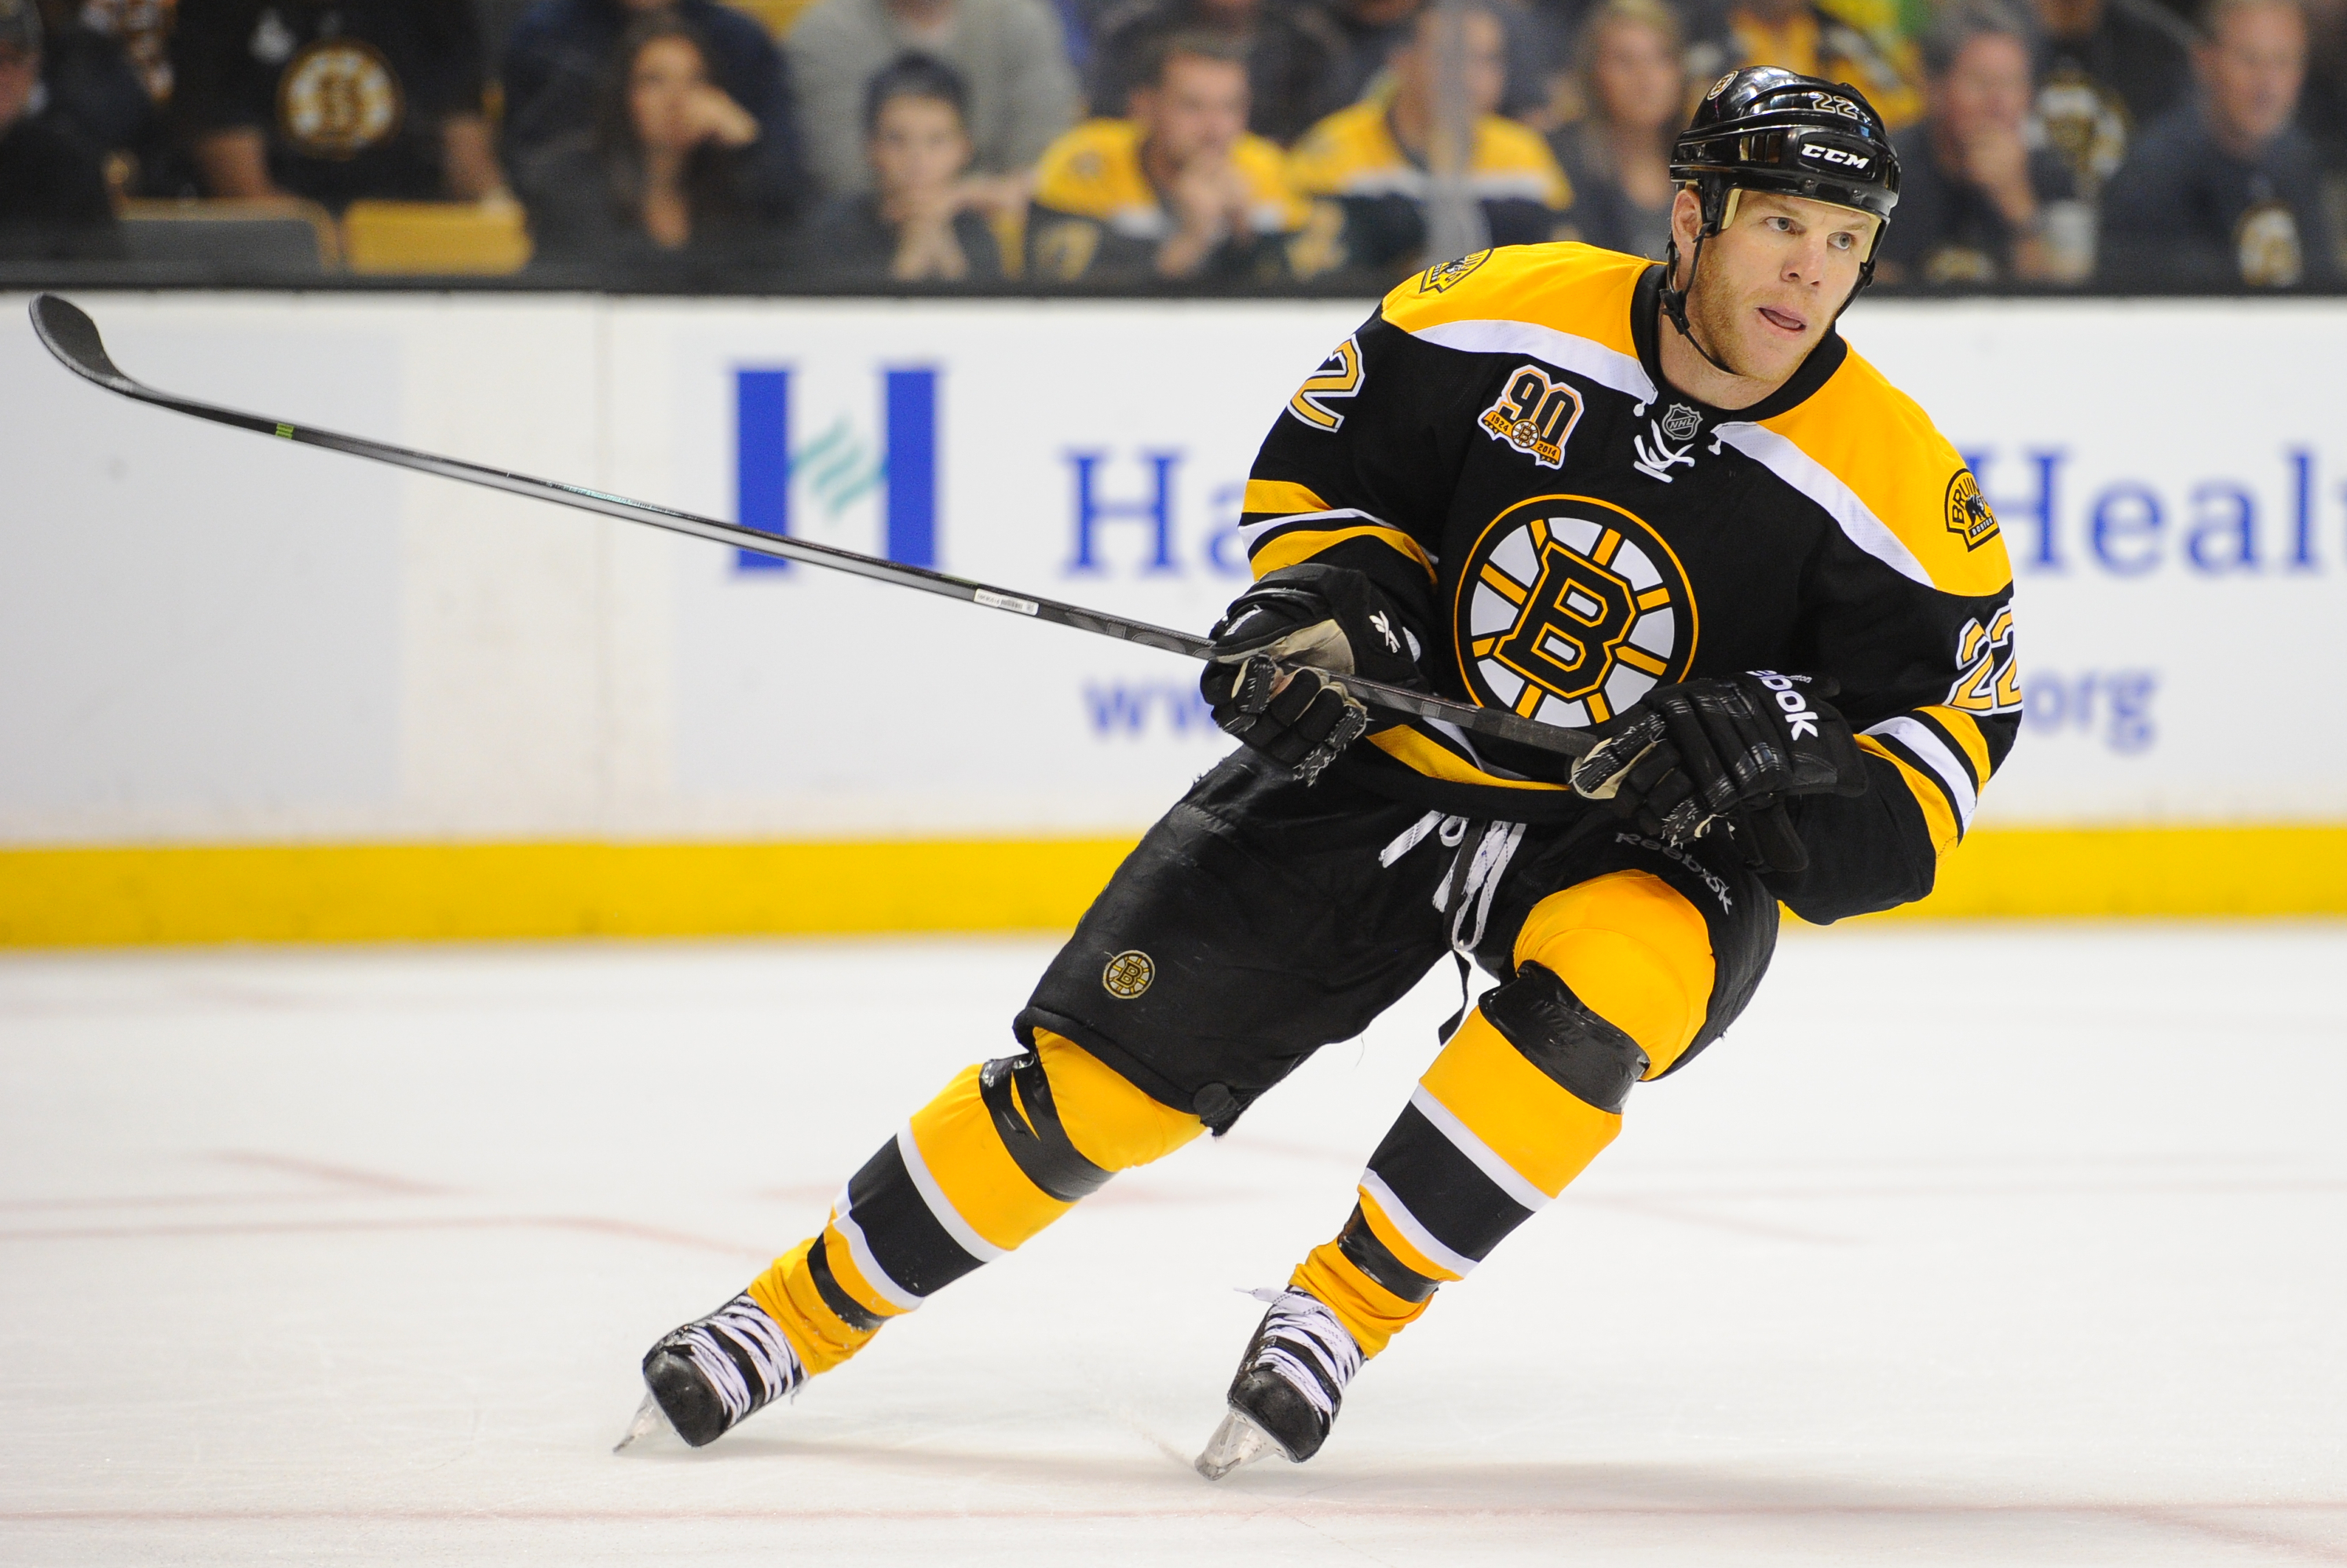 Boston Bruins enforcer Shawn Thornton is charitable on and off the ice 